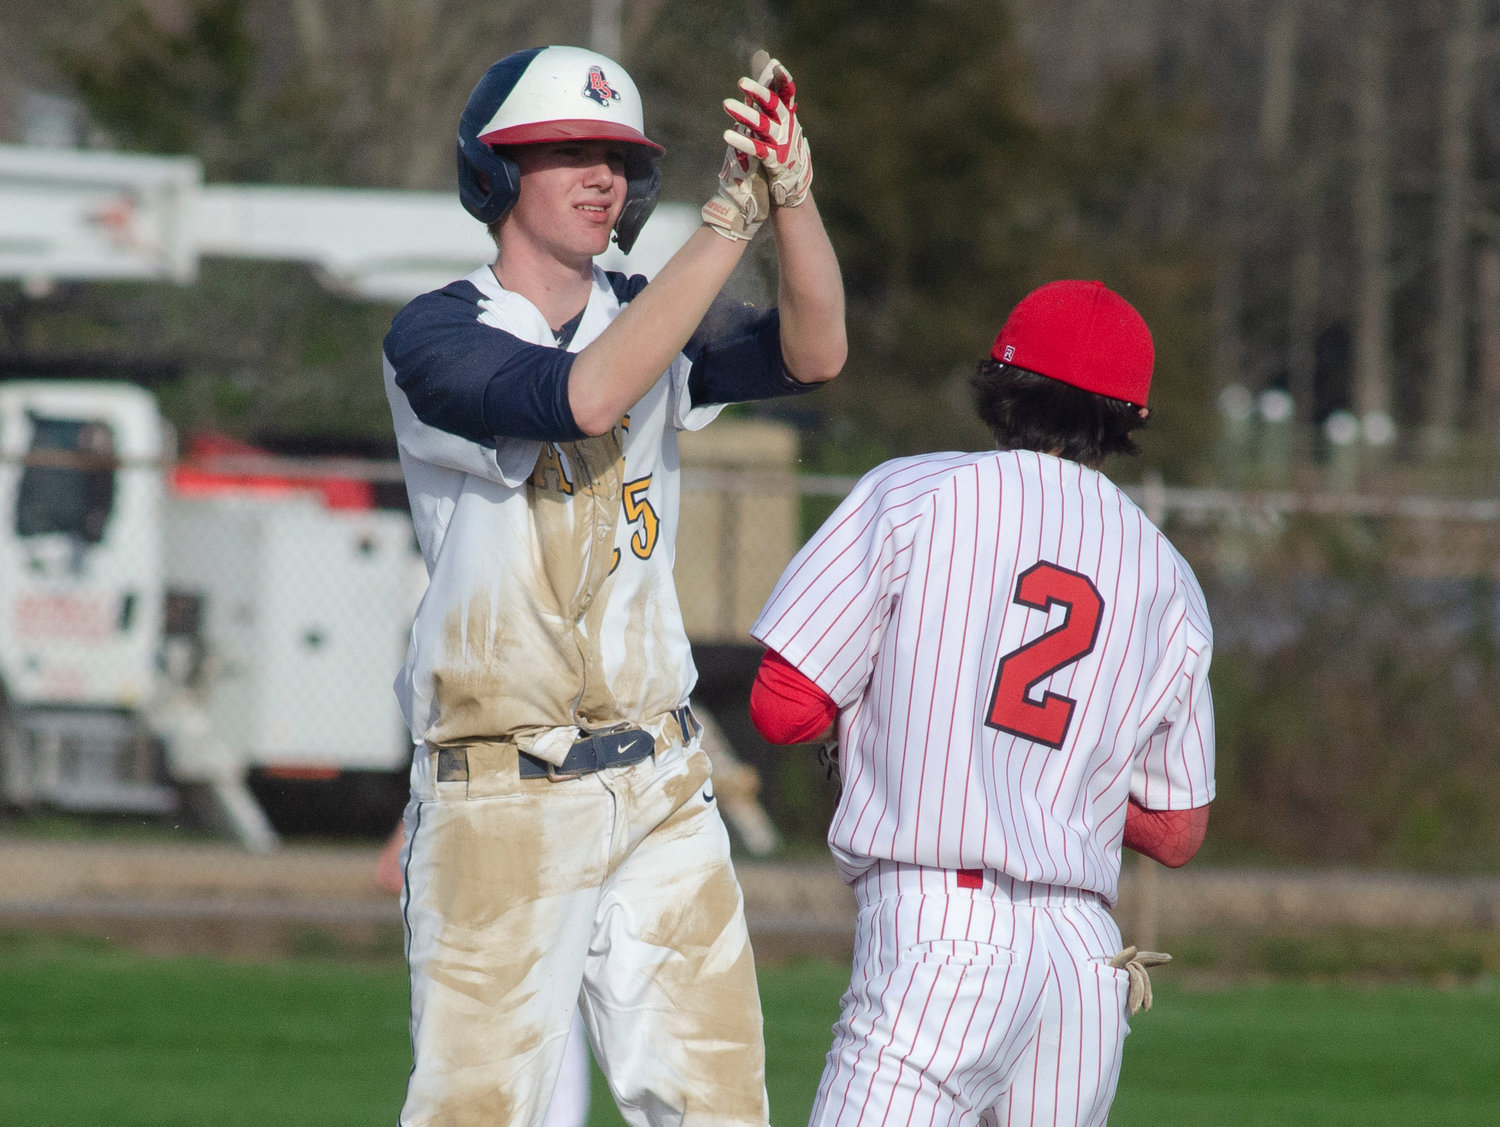 Barrington’s Matt Davis went 3-for-3 and helped the Eagles defeat East Providence on April 13.